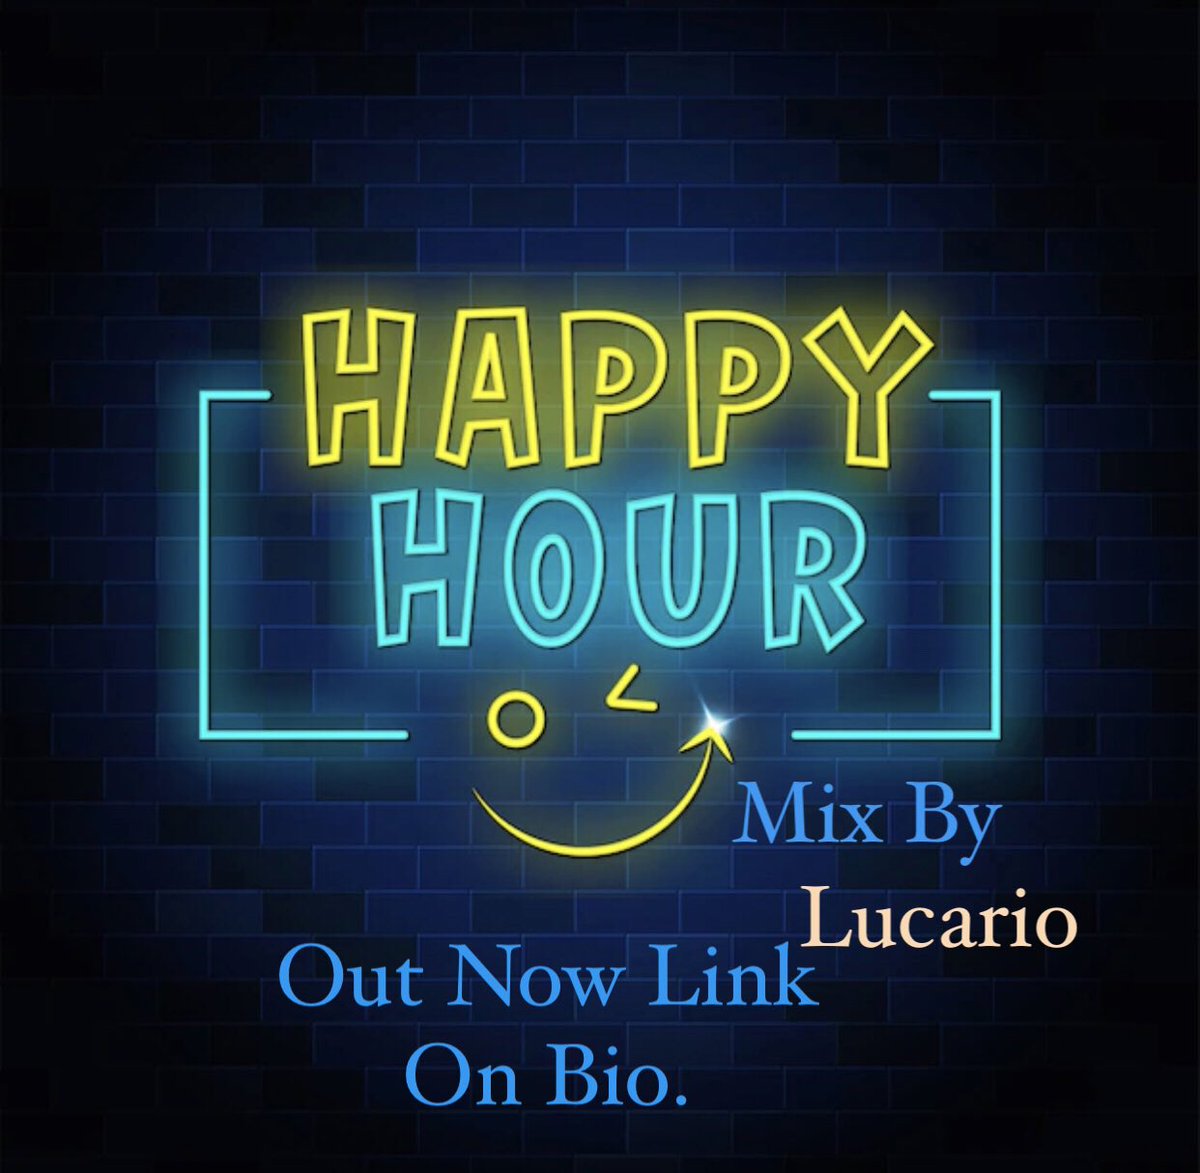 Happy Hour Mix By Lucario 🦍🔥
Do Listen & Share ❤️
Link : on.soundcloud.com/DqzX4y2berfeeR…
#YoungCoffee
let me take you to motherland child of Africa 🌍 
#AfroHouse 
Likes Of 
@RealBlackCoffee 
@Hyenahmusic (@CaiiroSA )
@kgzoo1 
@drfeelsa 
@ItsCitizenDeep 
@bun_xapa 
@SaintEvoMusic